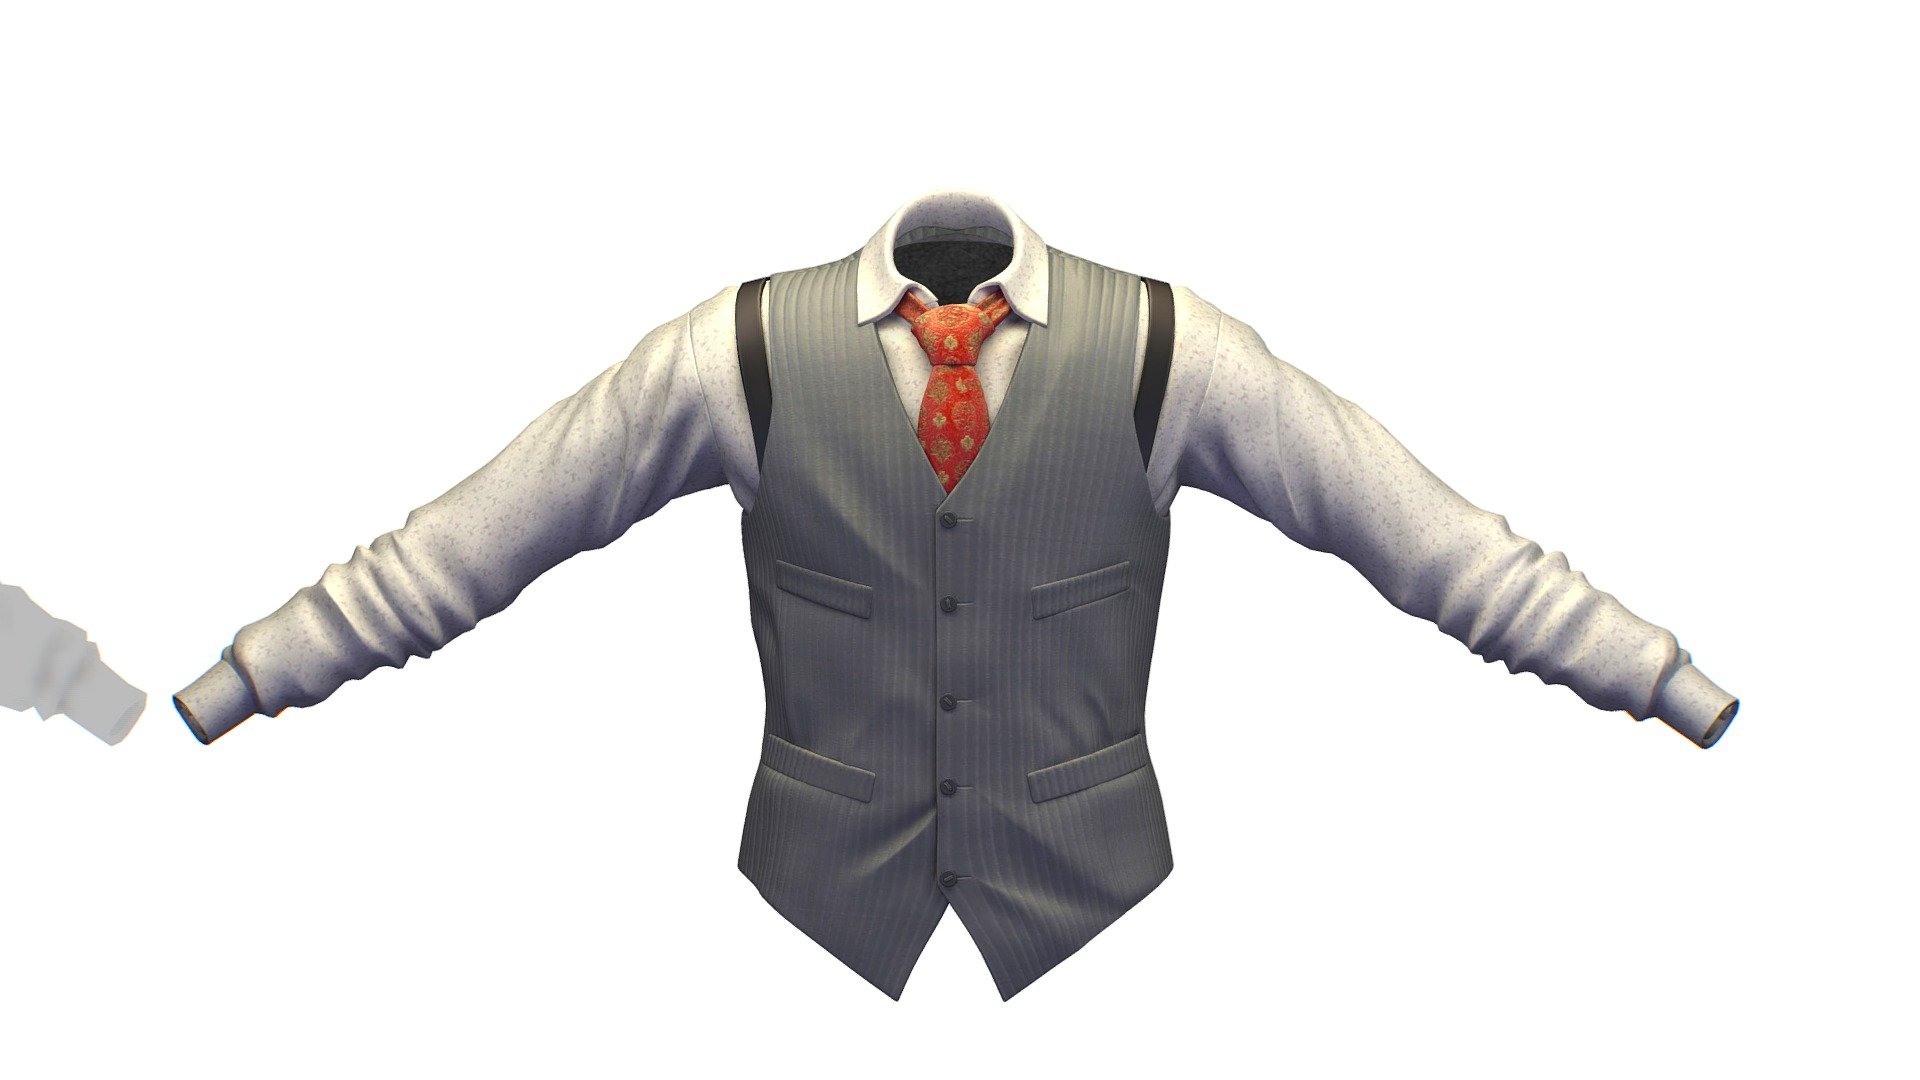 Cartoon High Poly Subdivision Jacket Shirt Tie

No HDRI map, No Light, No material settings - only Diffuse/Color Map Texture (2500x2500)

More information about the 3D model: please use the Sketchfab Model Inspector - Key (i) - Cartoon High Poly Subdivision Jacket Shirt Tie - Buy Royalty Free 3D model by Oleg Shuldiakov (@olegshuldiakov) 3d model